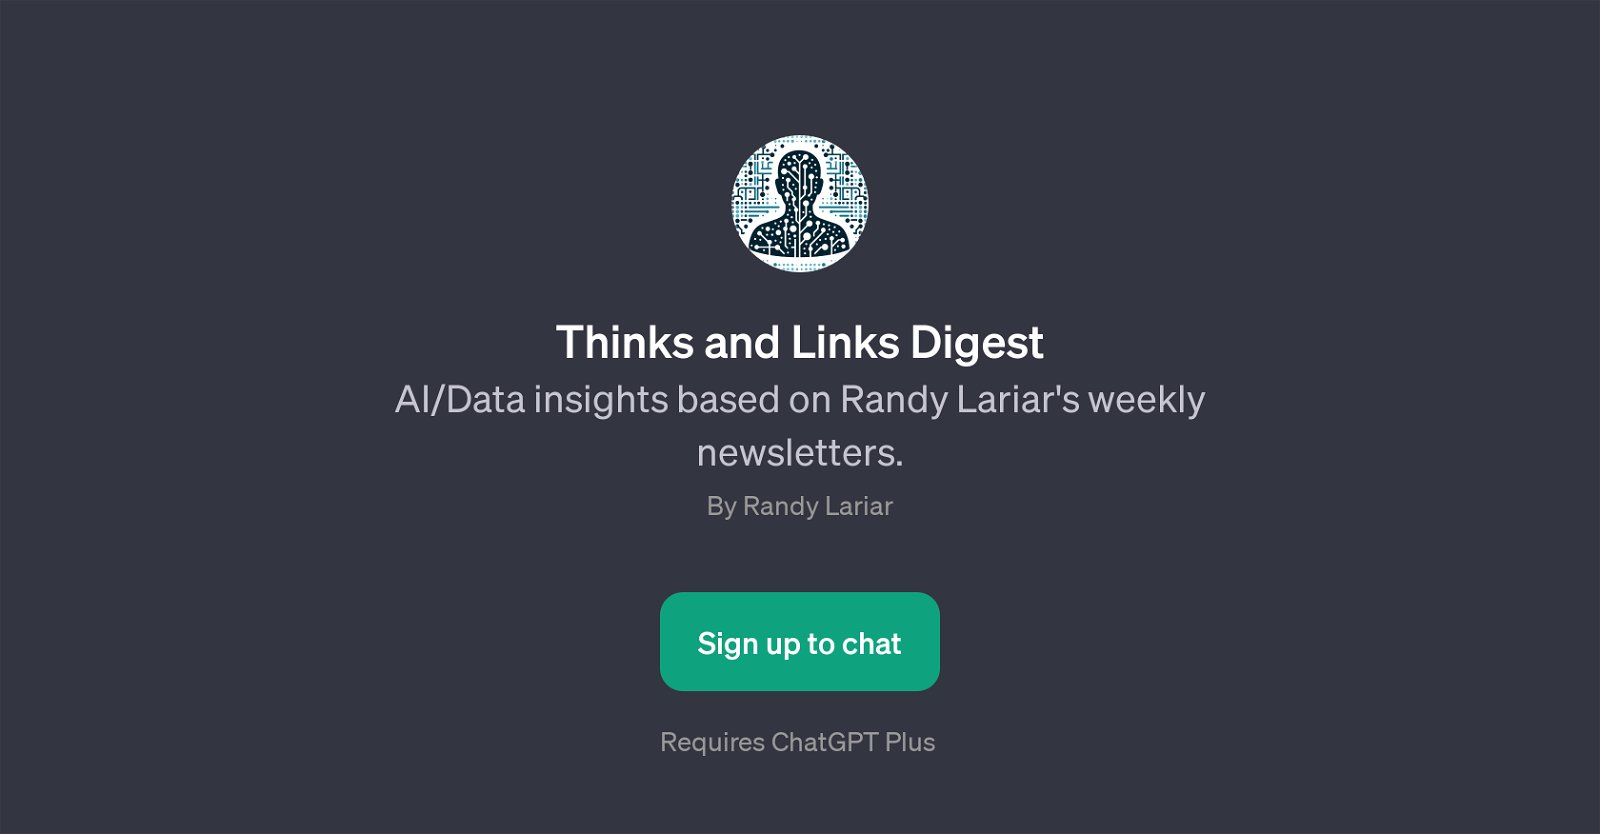 Thinks and Links Digest website